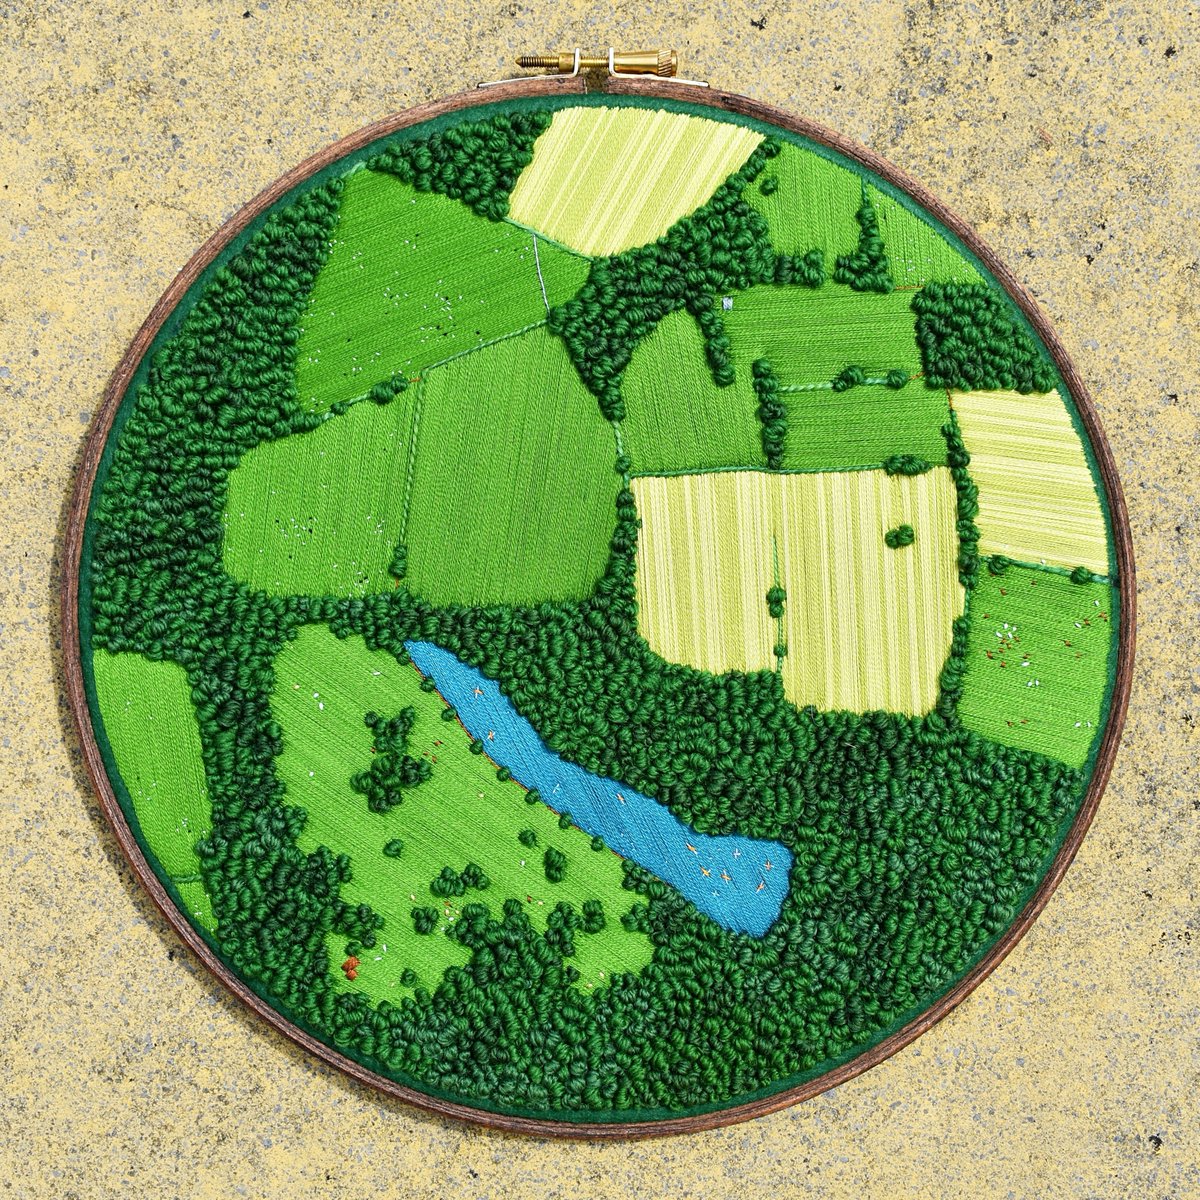 'A perfect summer's day for a swim' - zoom in to see the kayakers and animals! I love doing landscapes like this with the tiny details added, I think it gives them more life :) this lake aerial embroidery is now available here: https://t.co/JN31zpIwcm #handmade #artist https://t.co/zdu24oqzBD